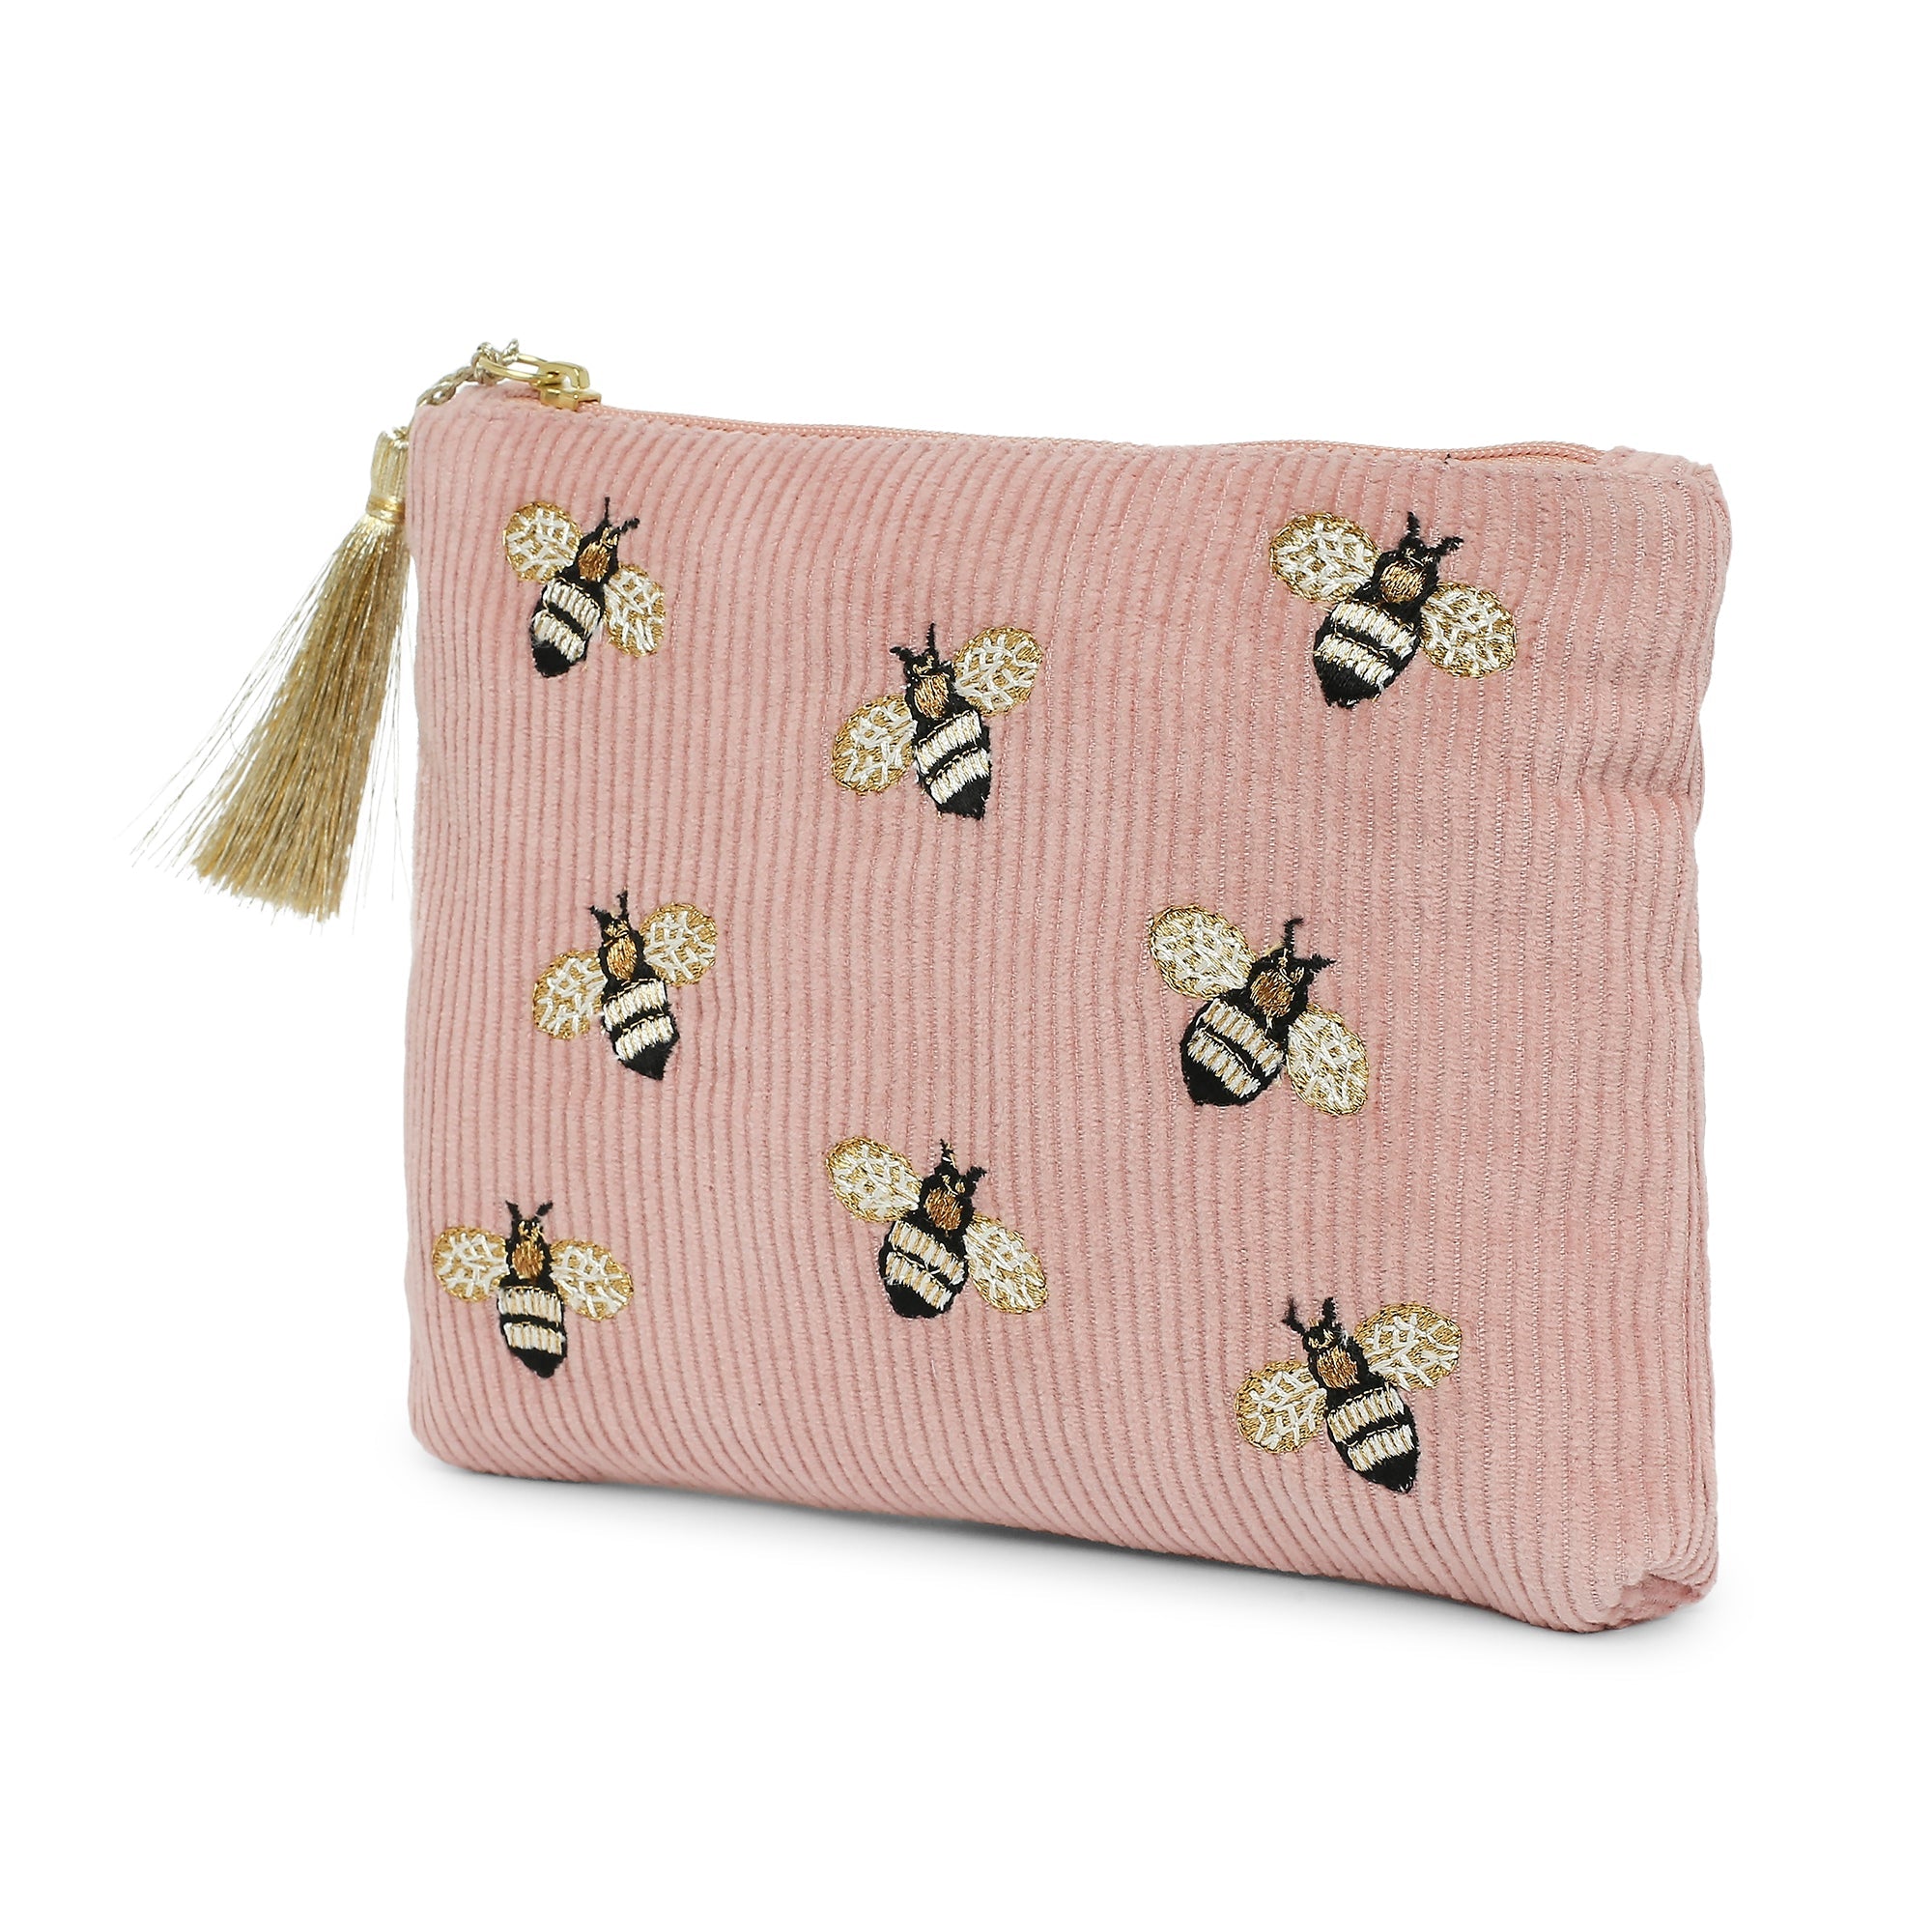 brand new butterfly/bee purse with matching clutch... - Depop